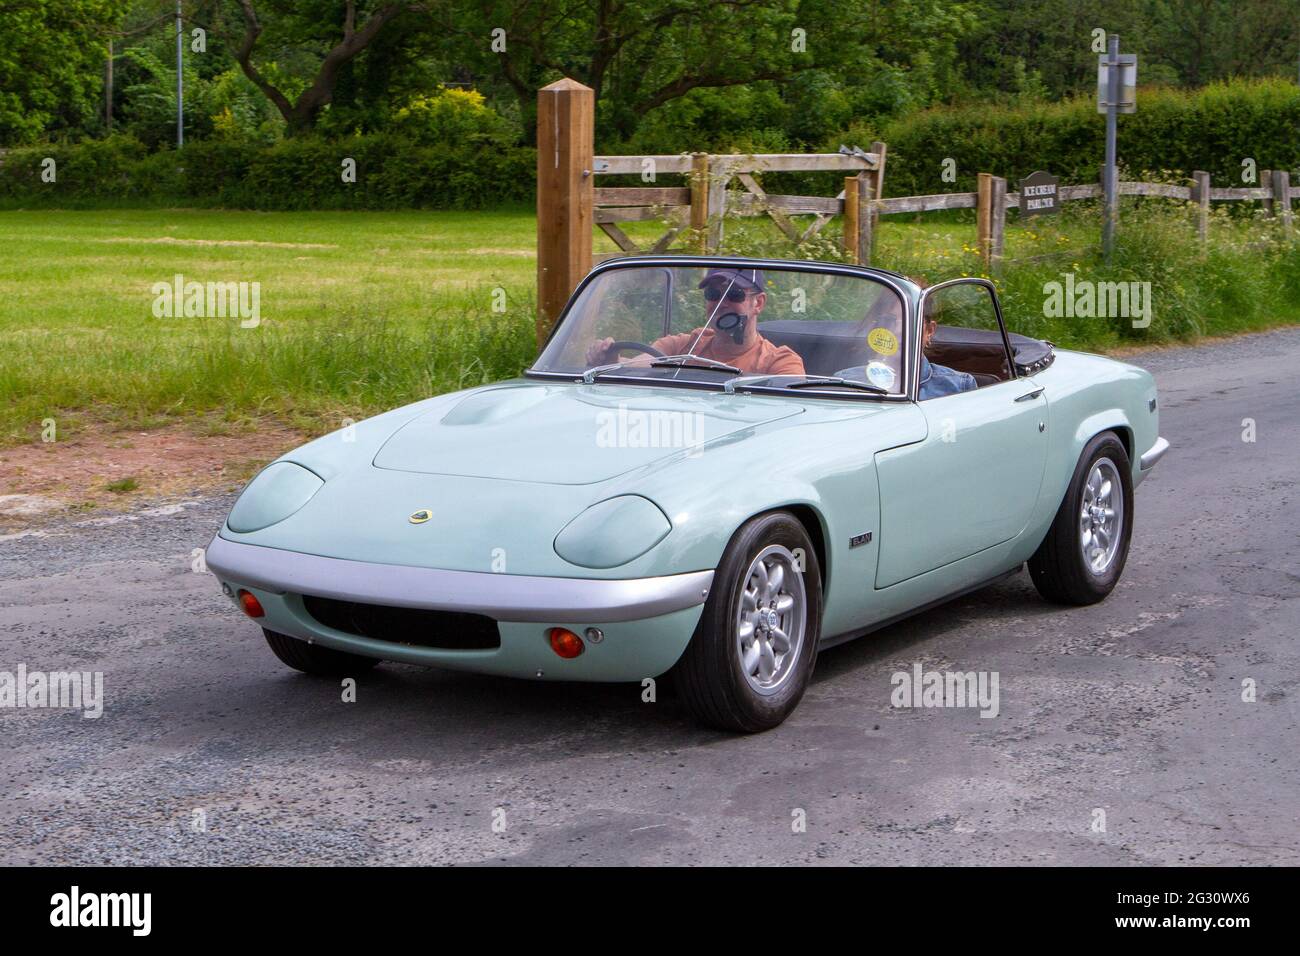 1962 60s Lotus Elan at the 58th Annual Manchester to Blackpool Vintage & Classic Car Run The event is a ‘Touring Assembly’ Stock Photo